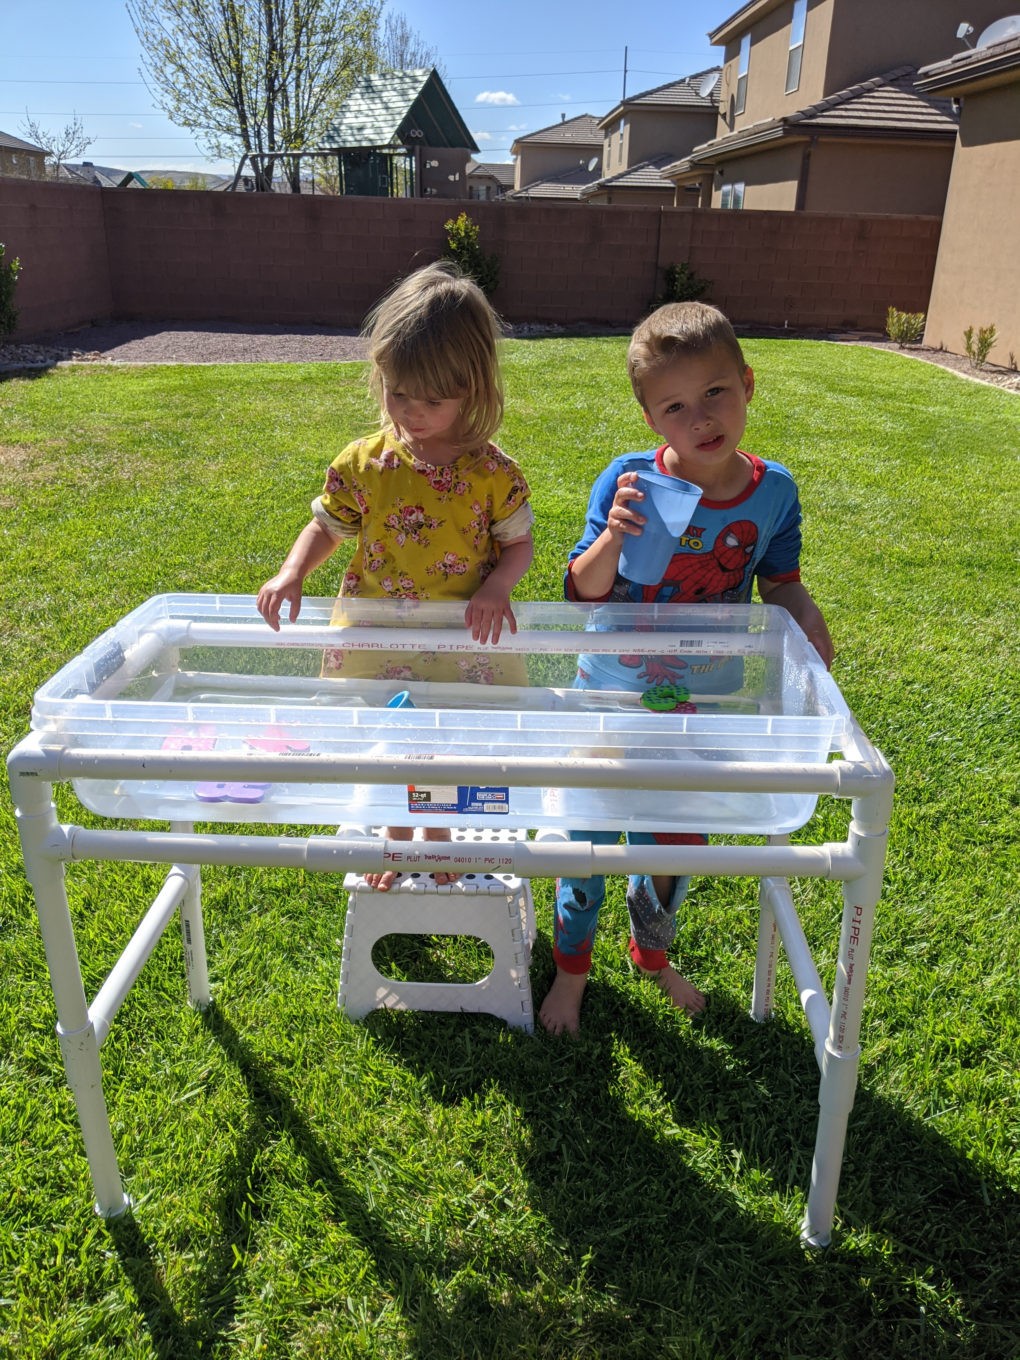 Tutorial for how to make your own DIY PVC pipe water table for backyard fun with the kids this summer. Easy and simple outside entertainment for toddlers.